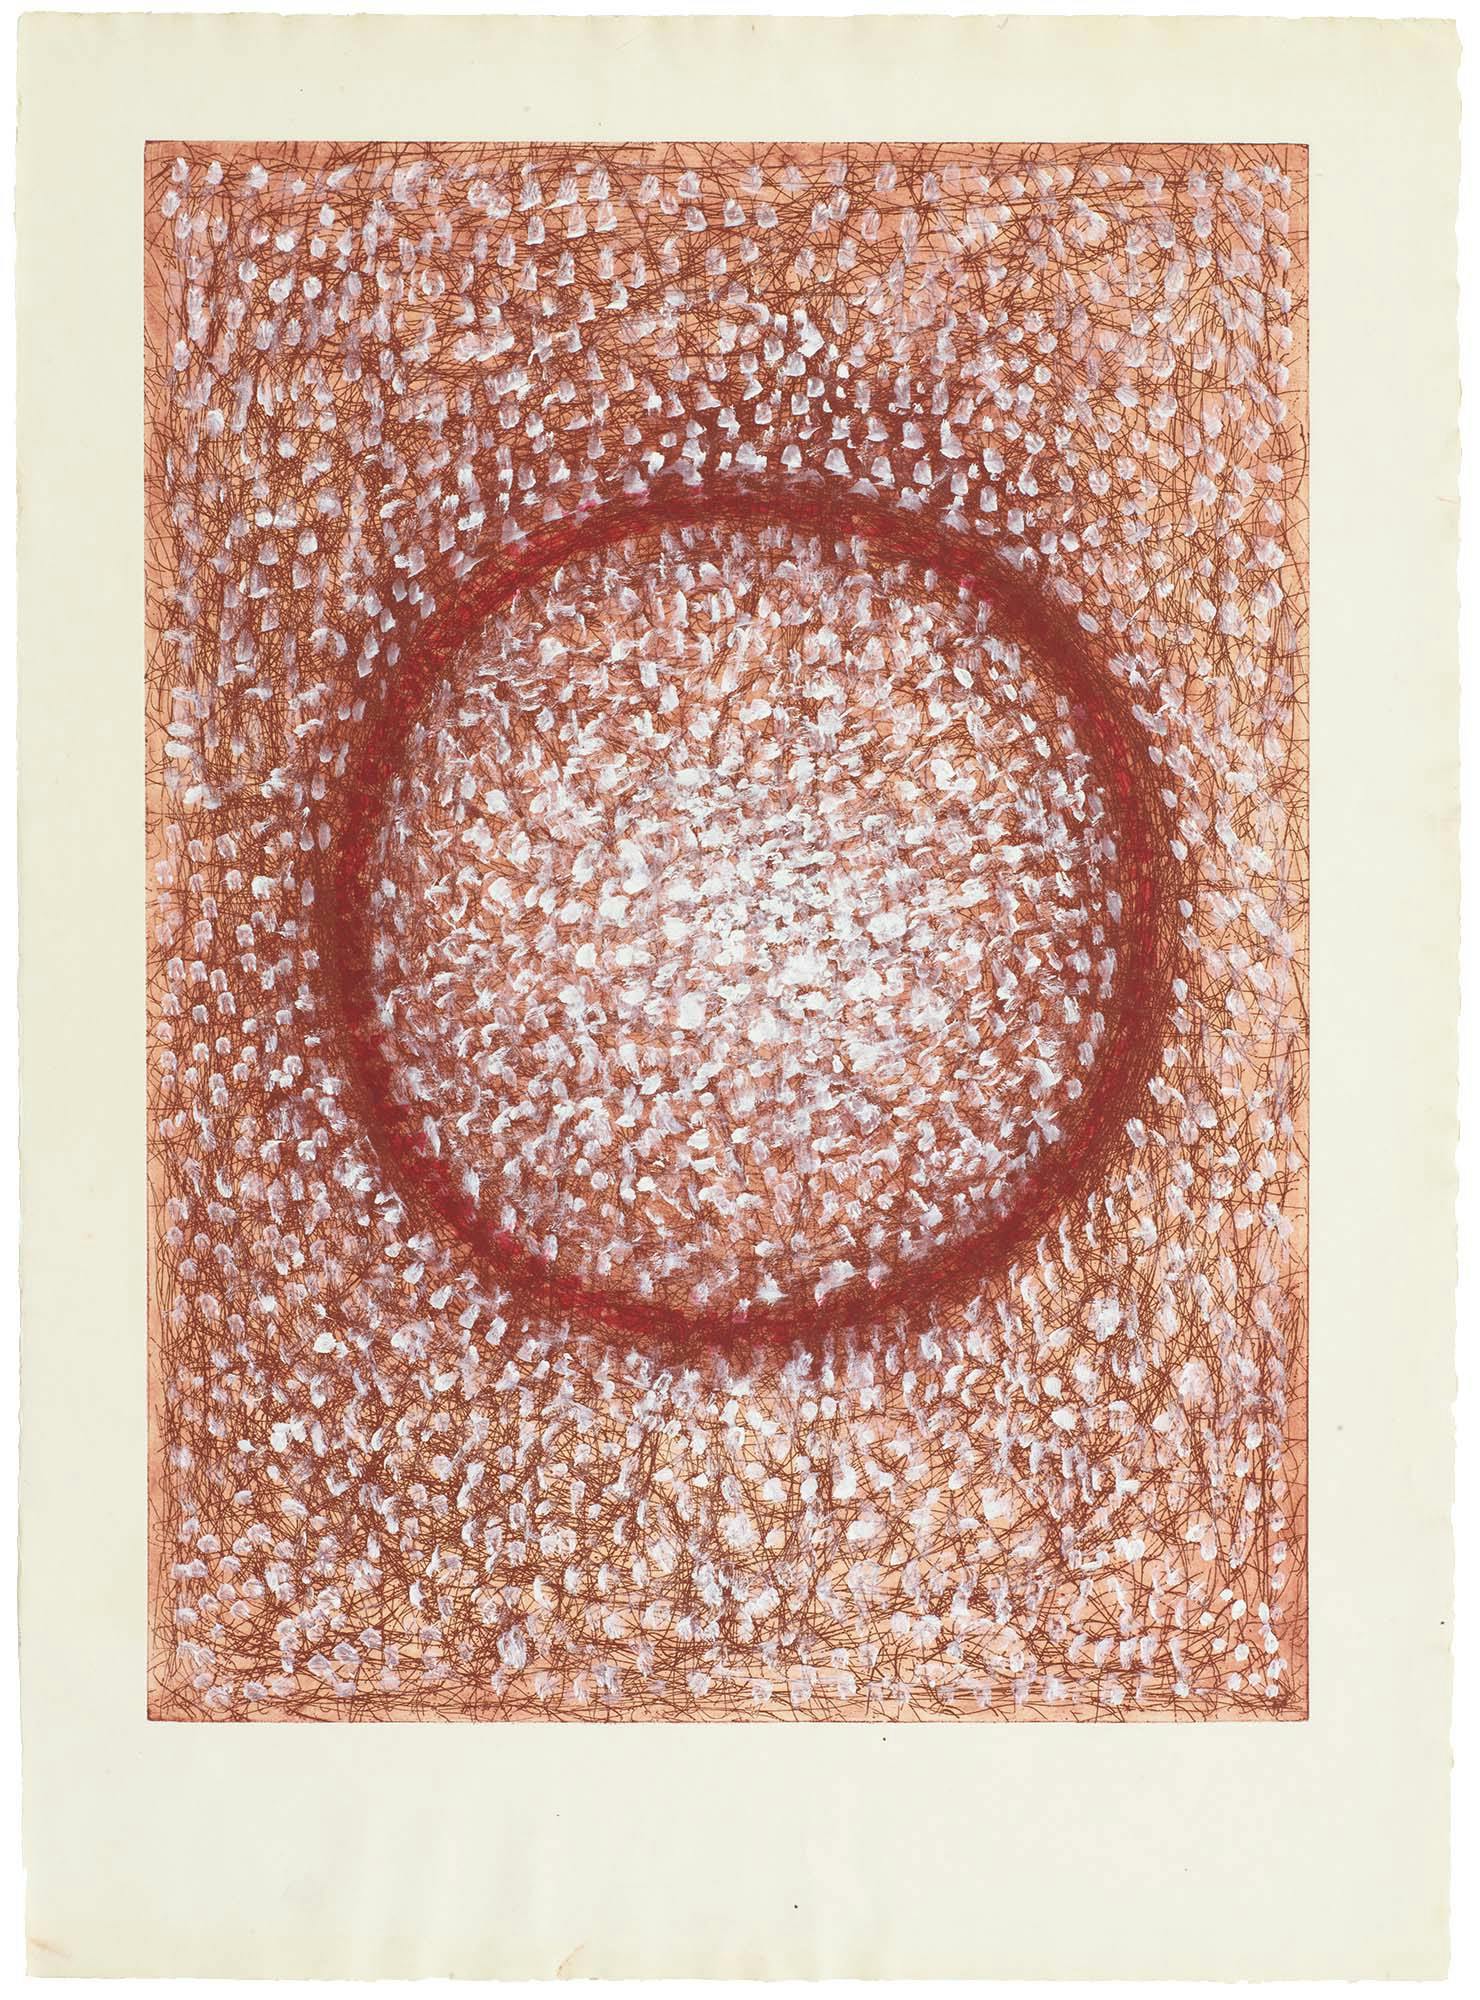 Indian Circle
1980
Etching with gouache and acrylic
21 1/2 x 29 1/2 in. (54.6 x 74.9 cm)
Plate: 17 1/2 x 23 3/4 in. (44.5 x 60.3 cm)
Sheet: 21 3/4 x 29 1/2 in. (55.2 x 74.9 cm)
 – The Richard Pousette-Dart Foundation